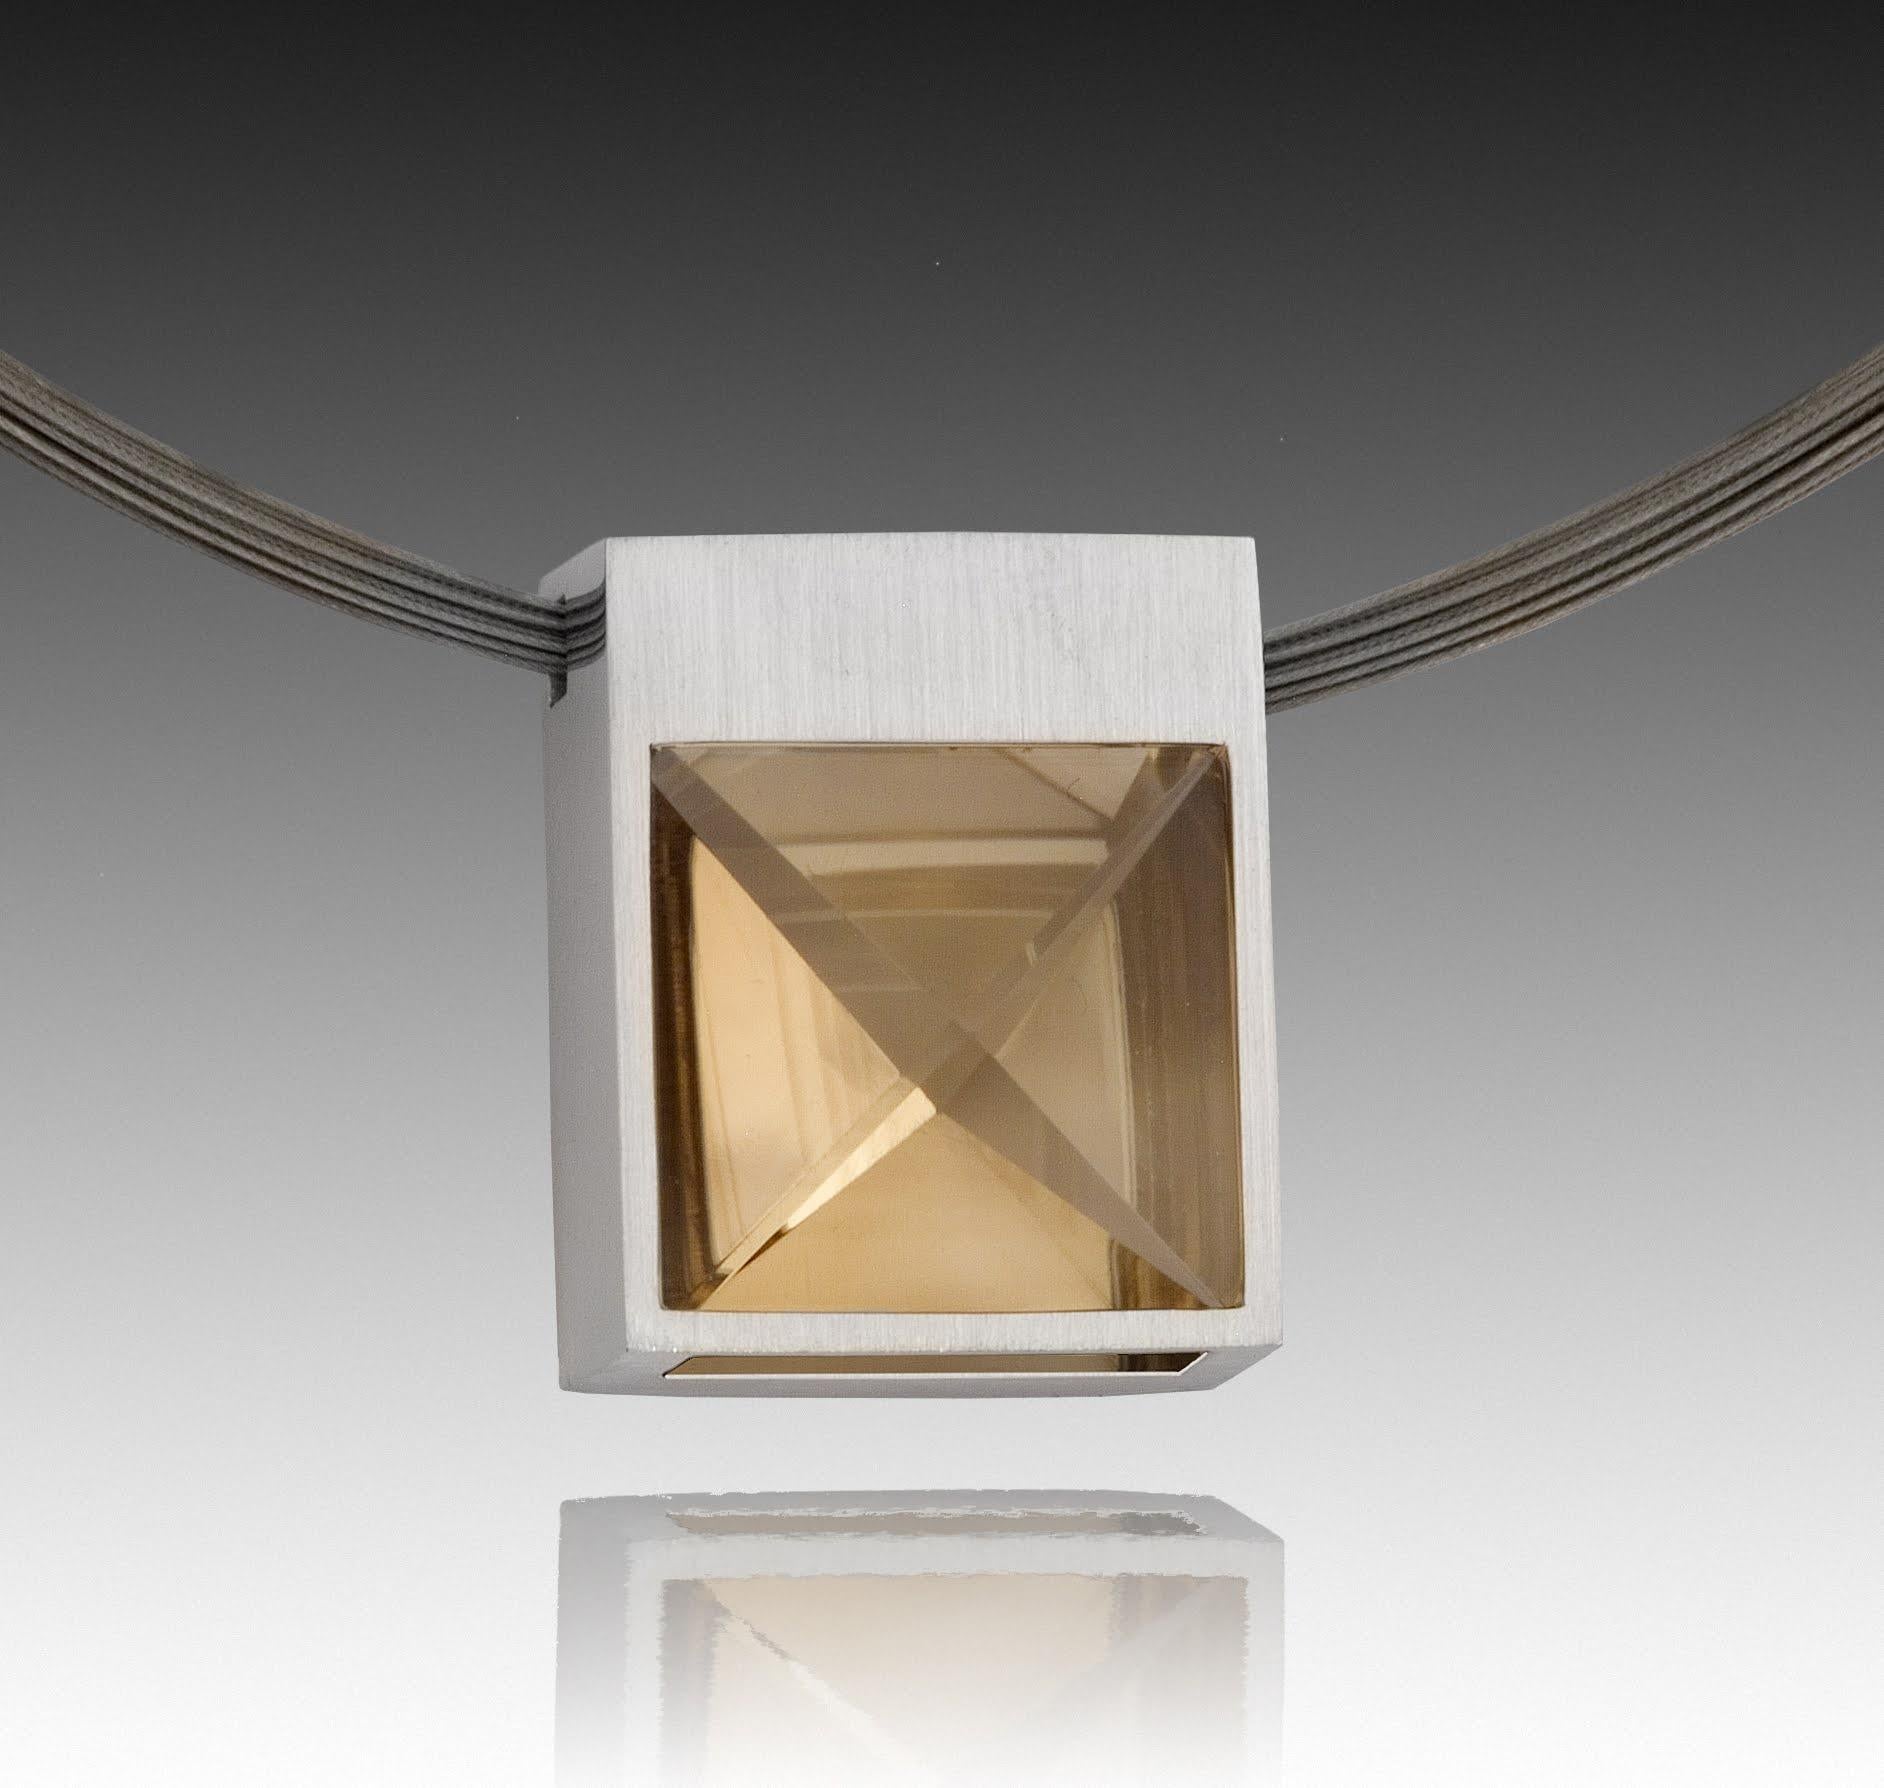 Be prepared to enter the fray in this one of a kind White Gold and Context Cut Citrine Square Pendant on Stainless Steel Wire, because you’re sure to incite envy from everyone else in the room. Set in 14k white gold the square Citrine weighs in at